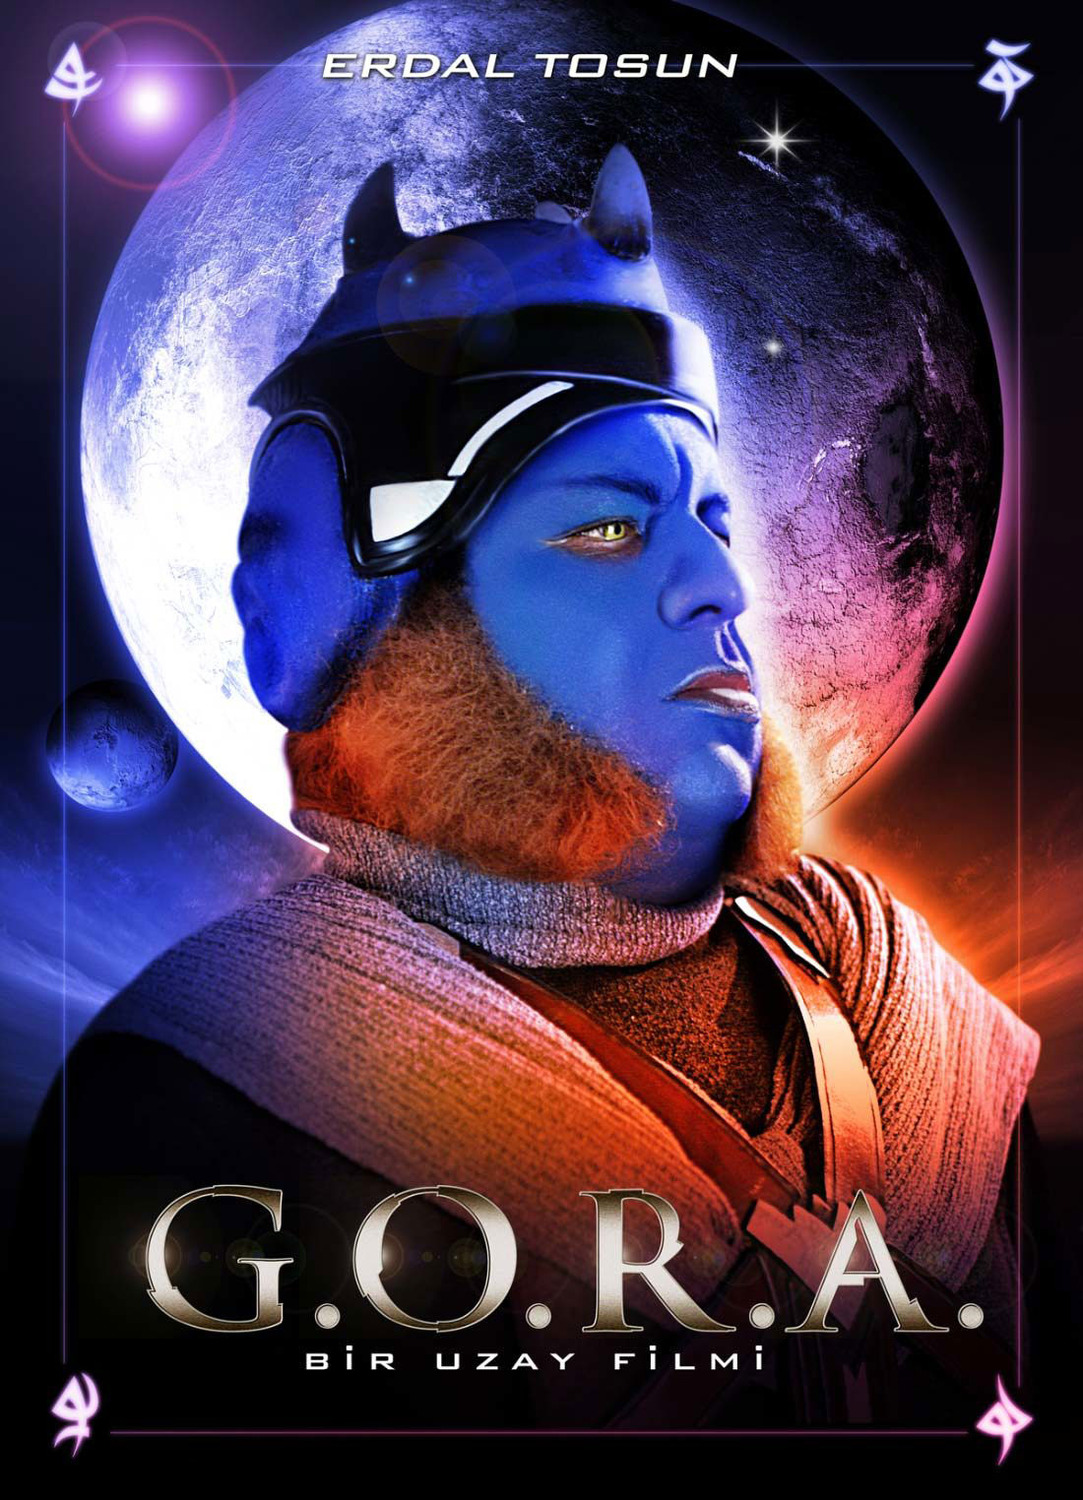 Extra Large Movie Poster Image for G.O.R.A. (#6 of 7)